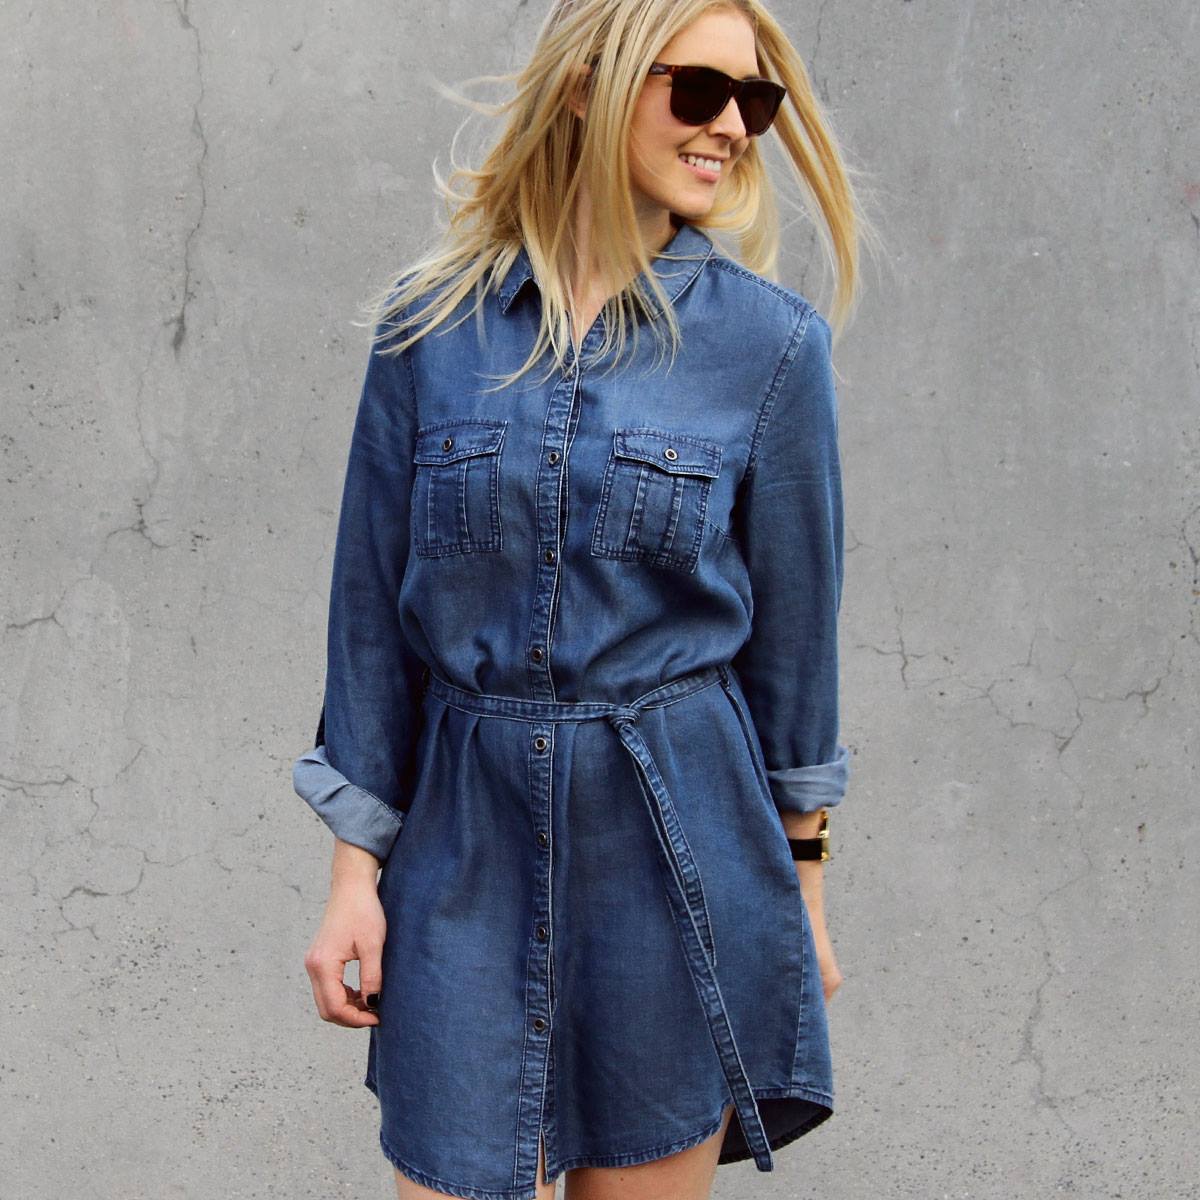 How To Style Denim from Work to The Weekend